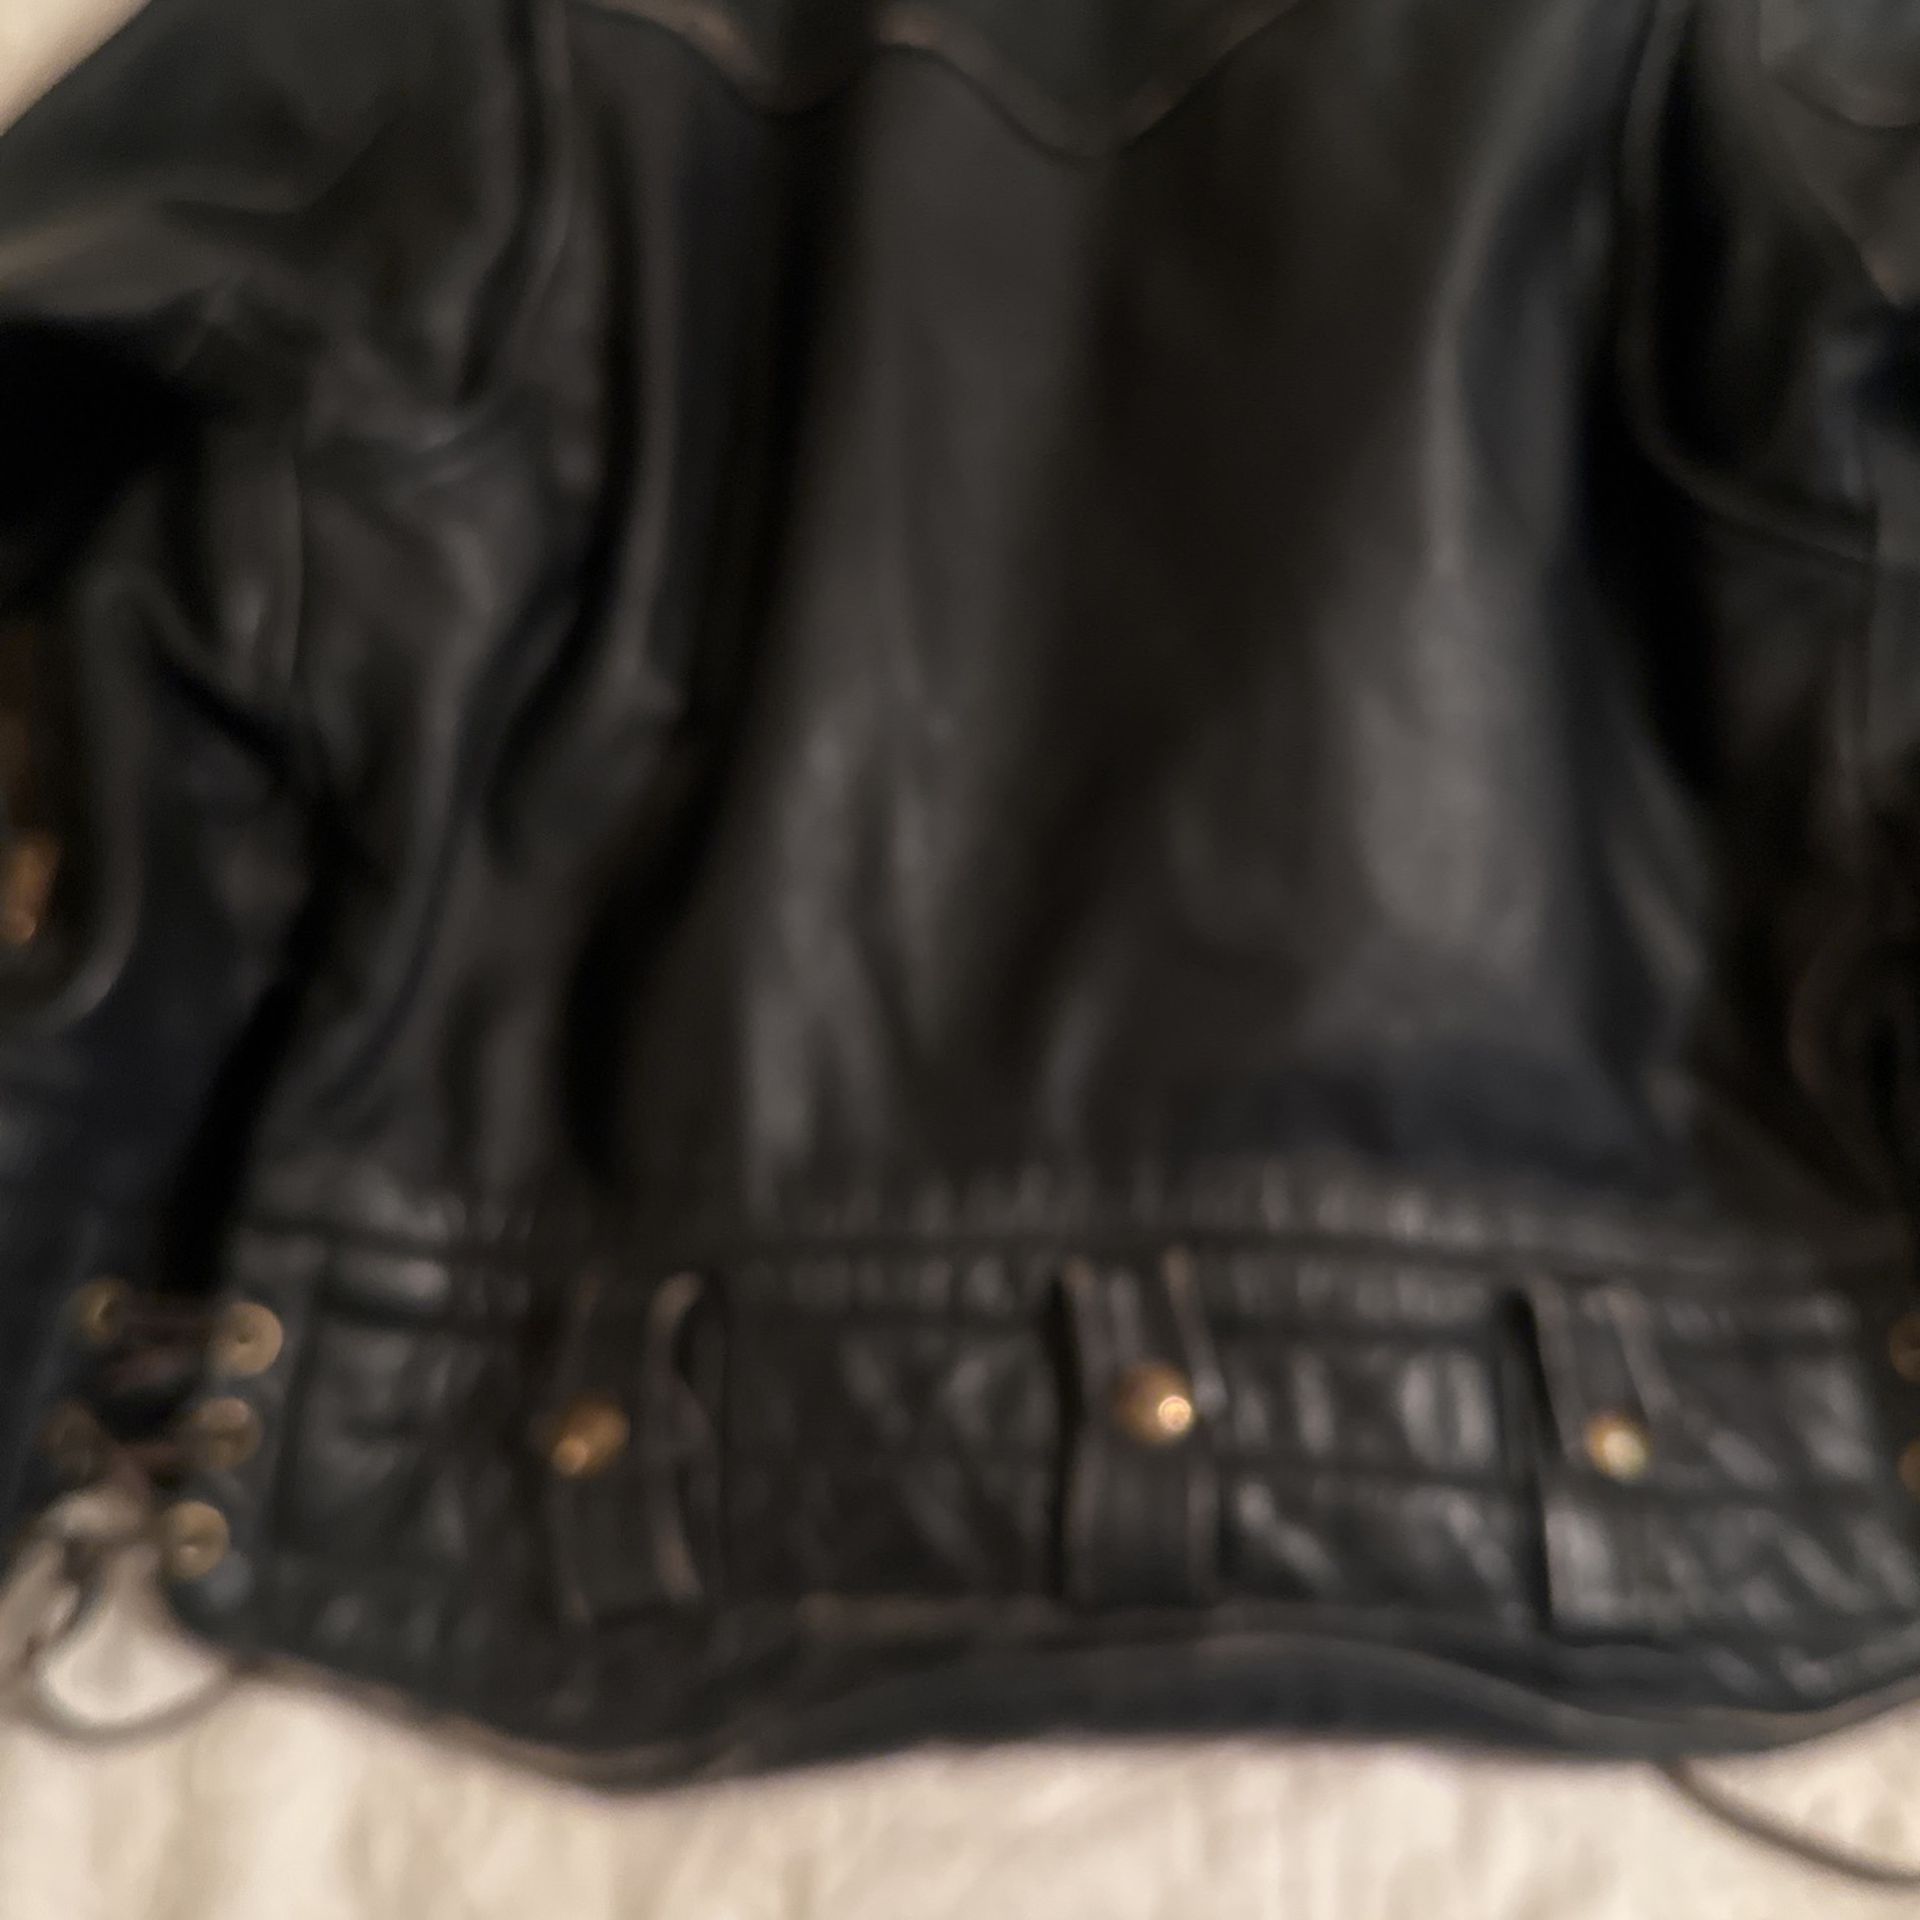 Vintage 1980’s Leather Motorcycle Jacket for Sale in Alhambra, CA - OfferUp